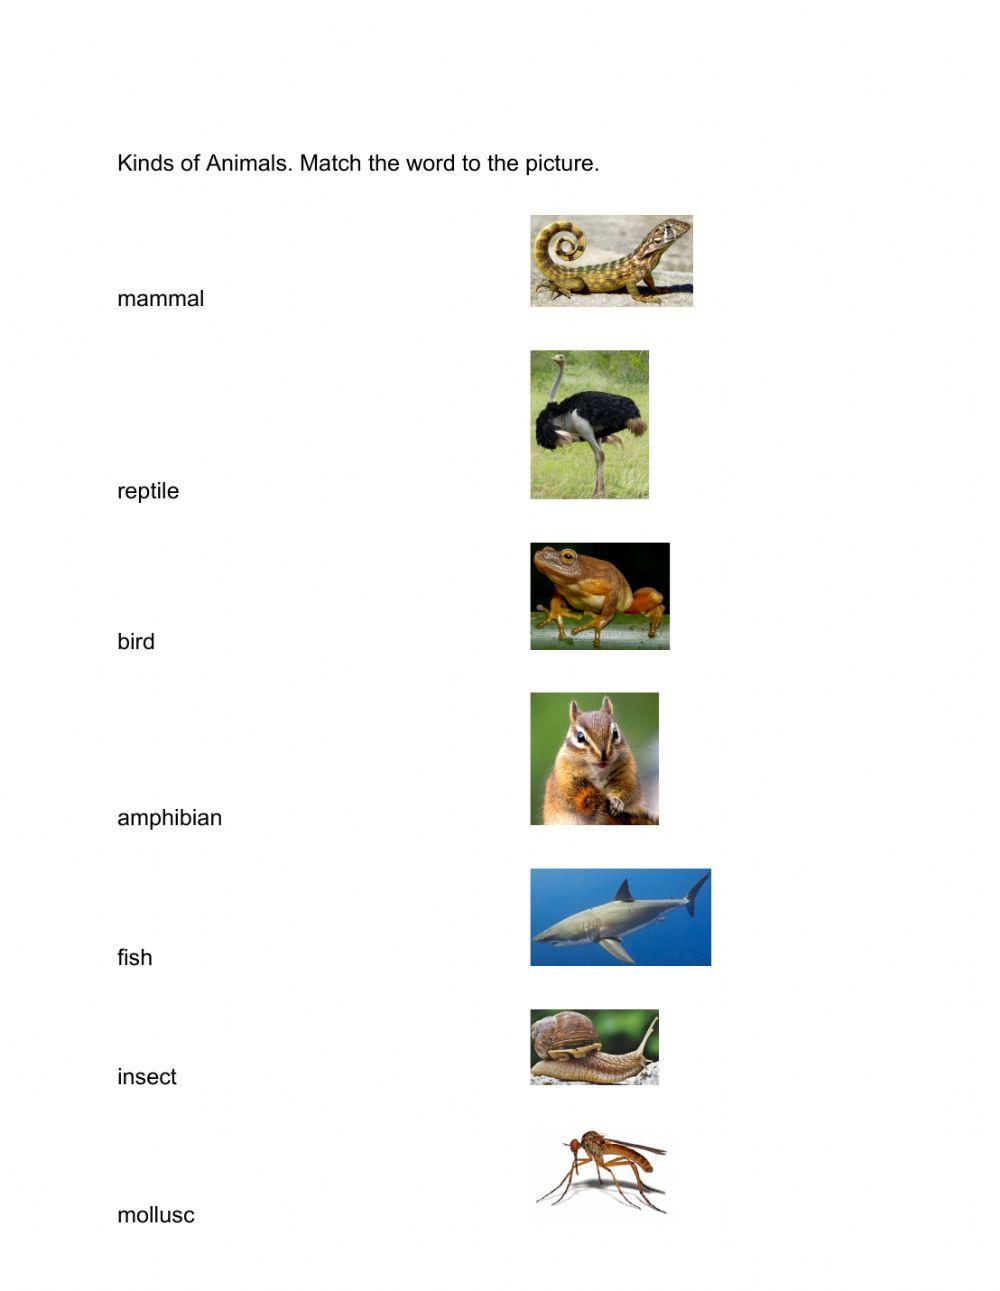 Animal Body Parts and Animal Classification